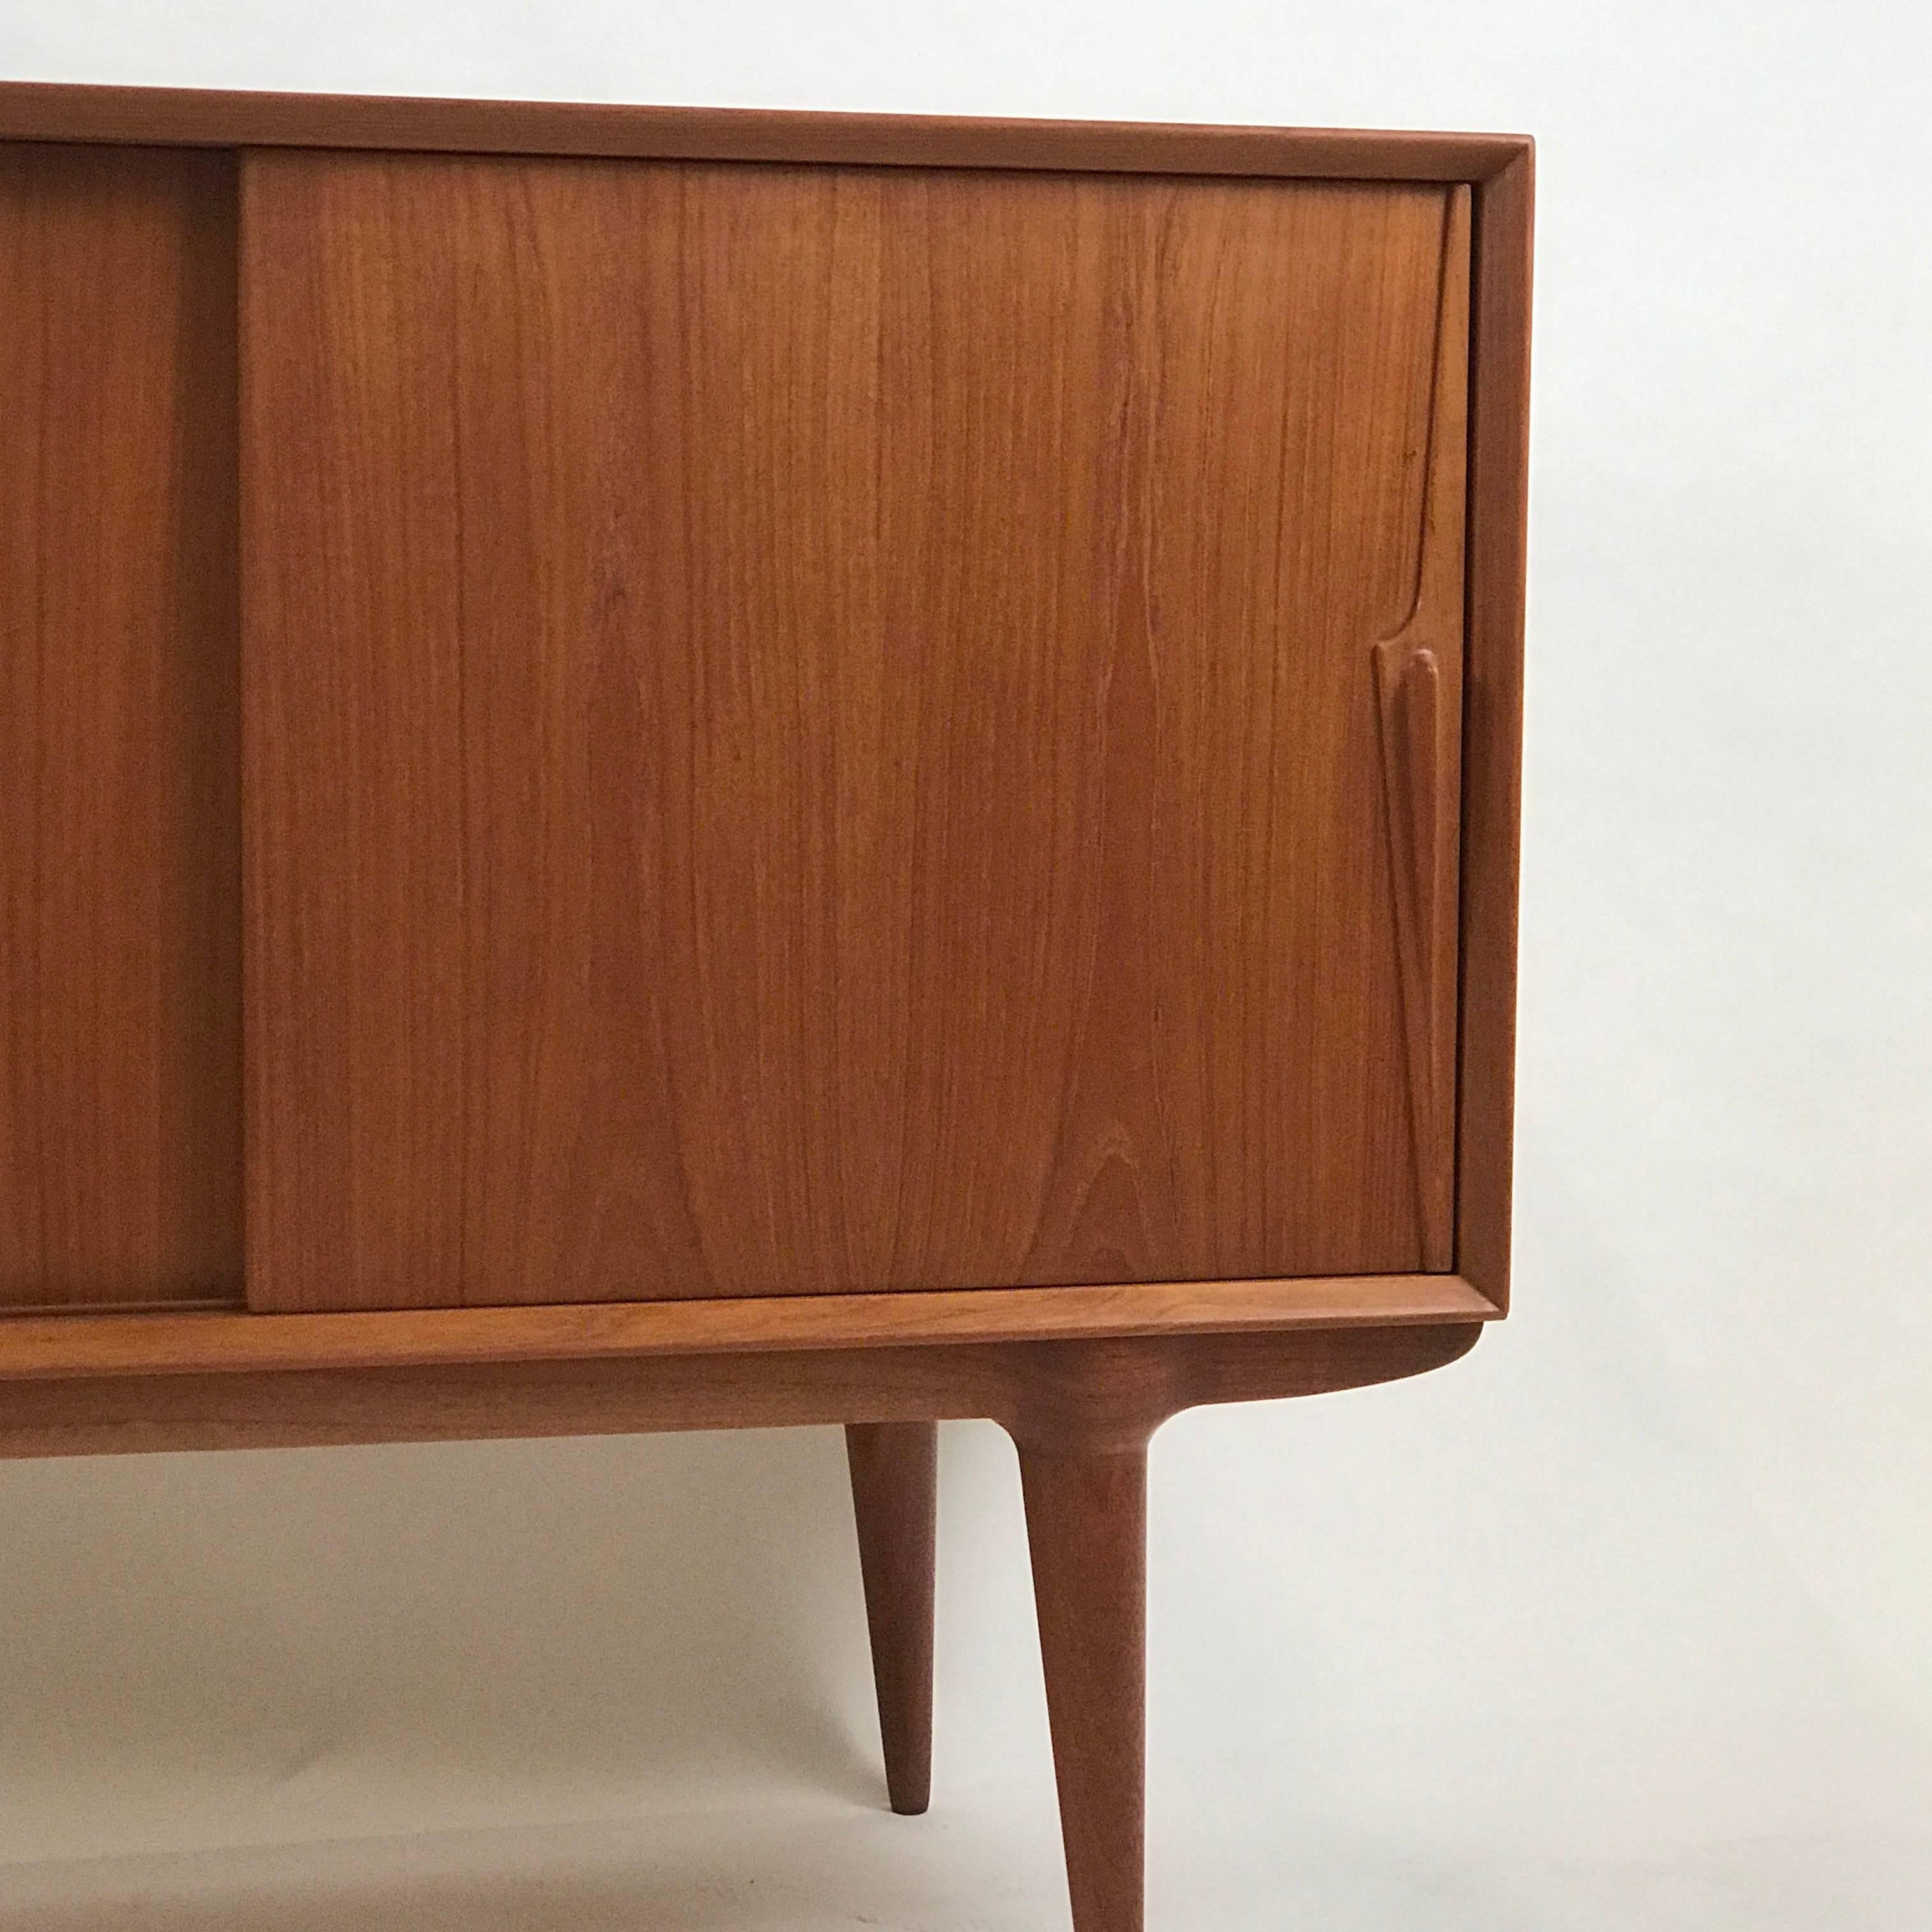 A freshly refinished teak sliding door credenza with four drawers.